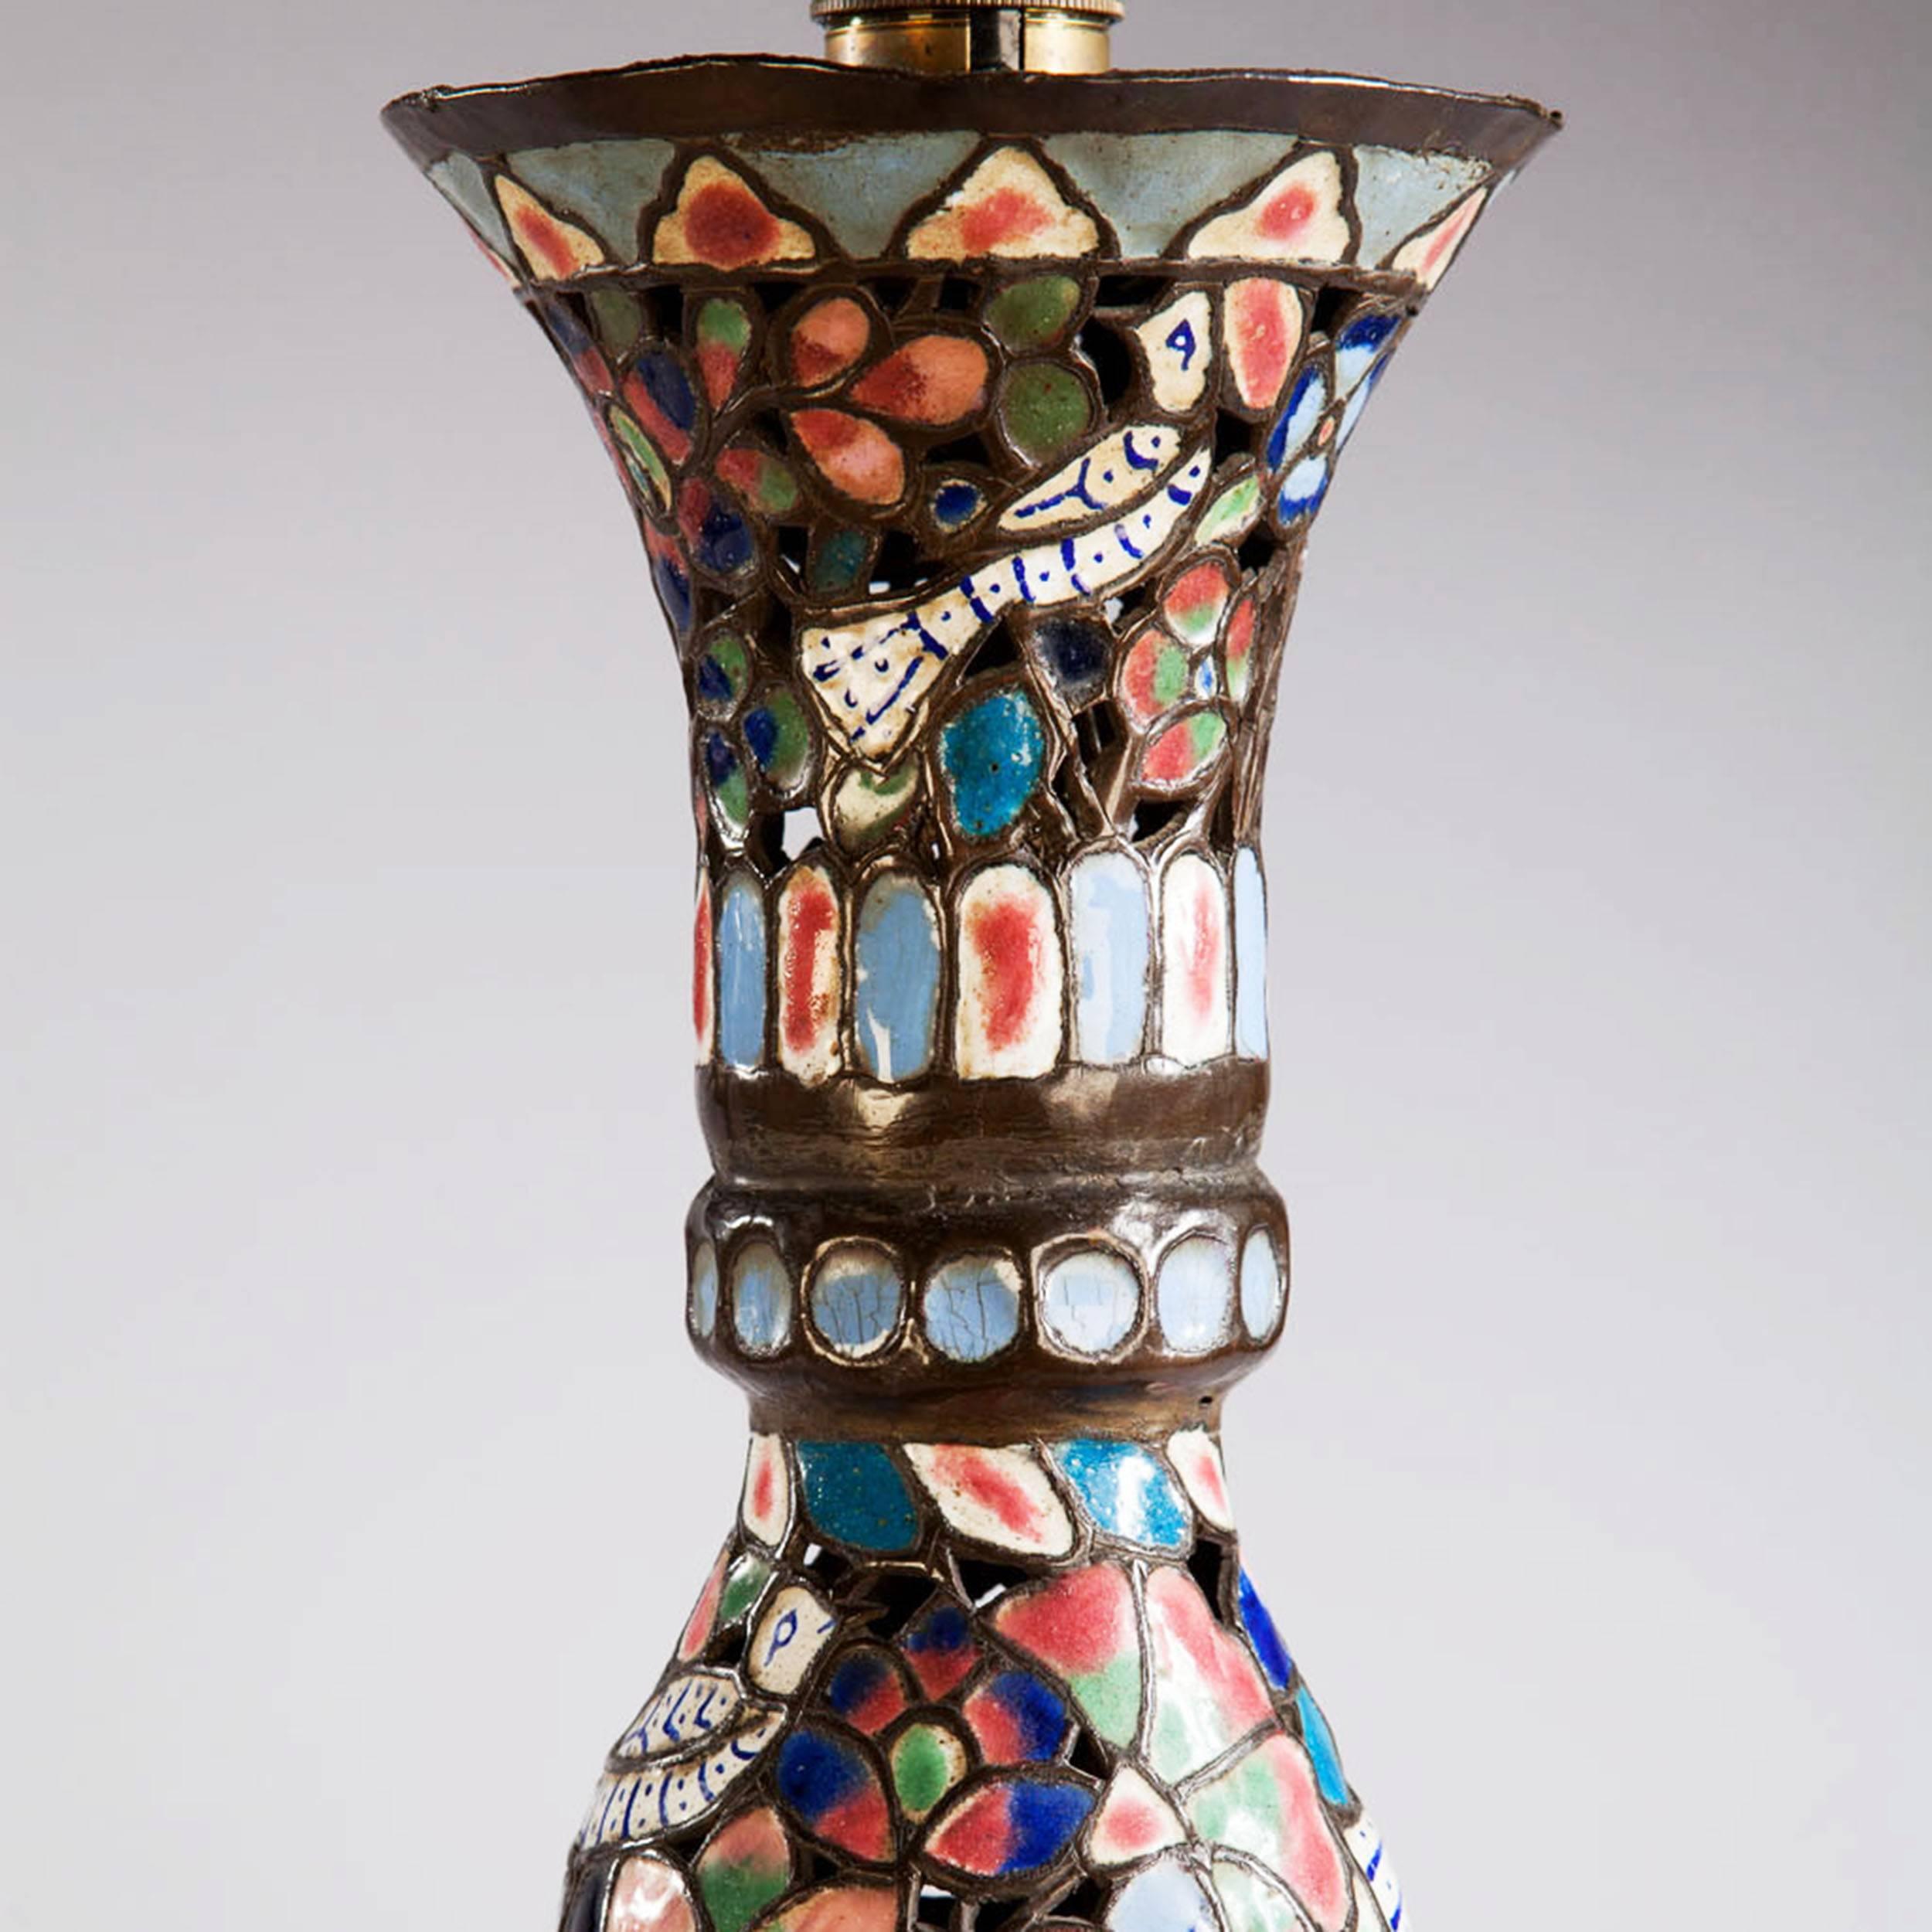 Moorish, circa 1900.

A fine and large pair of pierced and enamelled lamp bases decorated with birds and foliage in vivid colours of blue, pink, green and white with panels of script. 

Measures: Height 79.00cm (31 inches).
Diameter 33.00cm (13